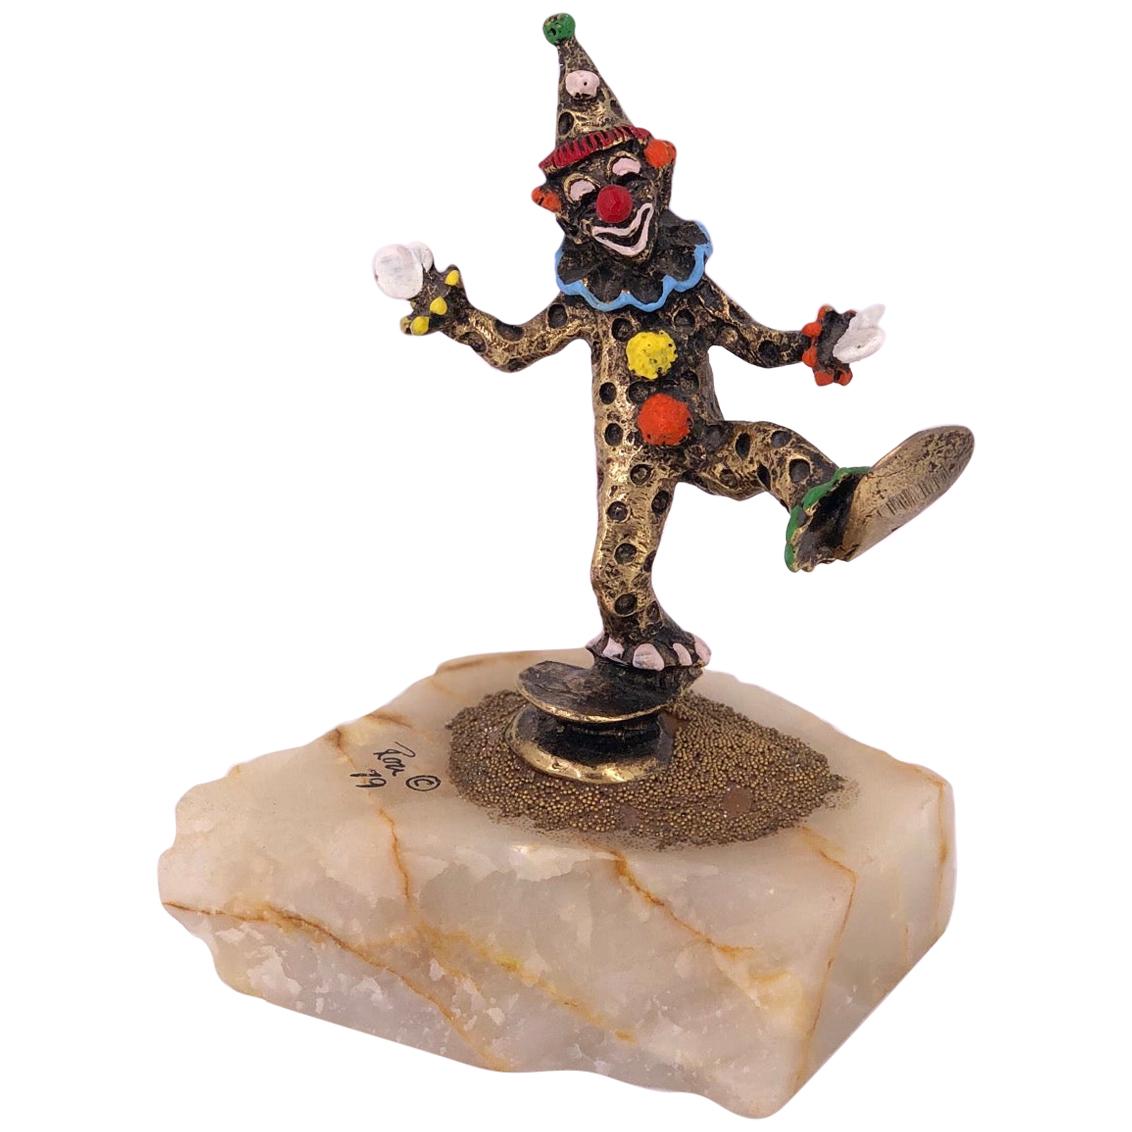 Whimsical Bronze Sculpture with Enamel Highlights Signed by Ron Lee